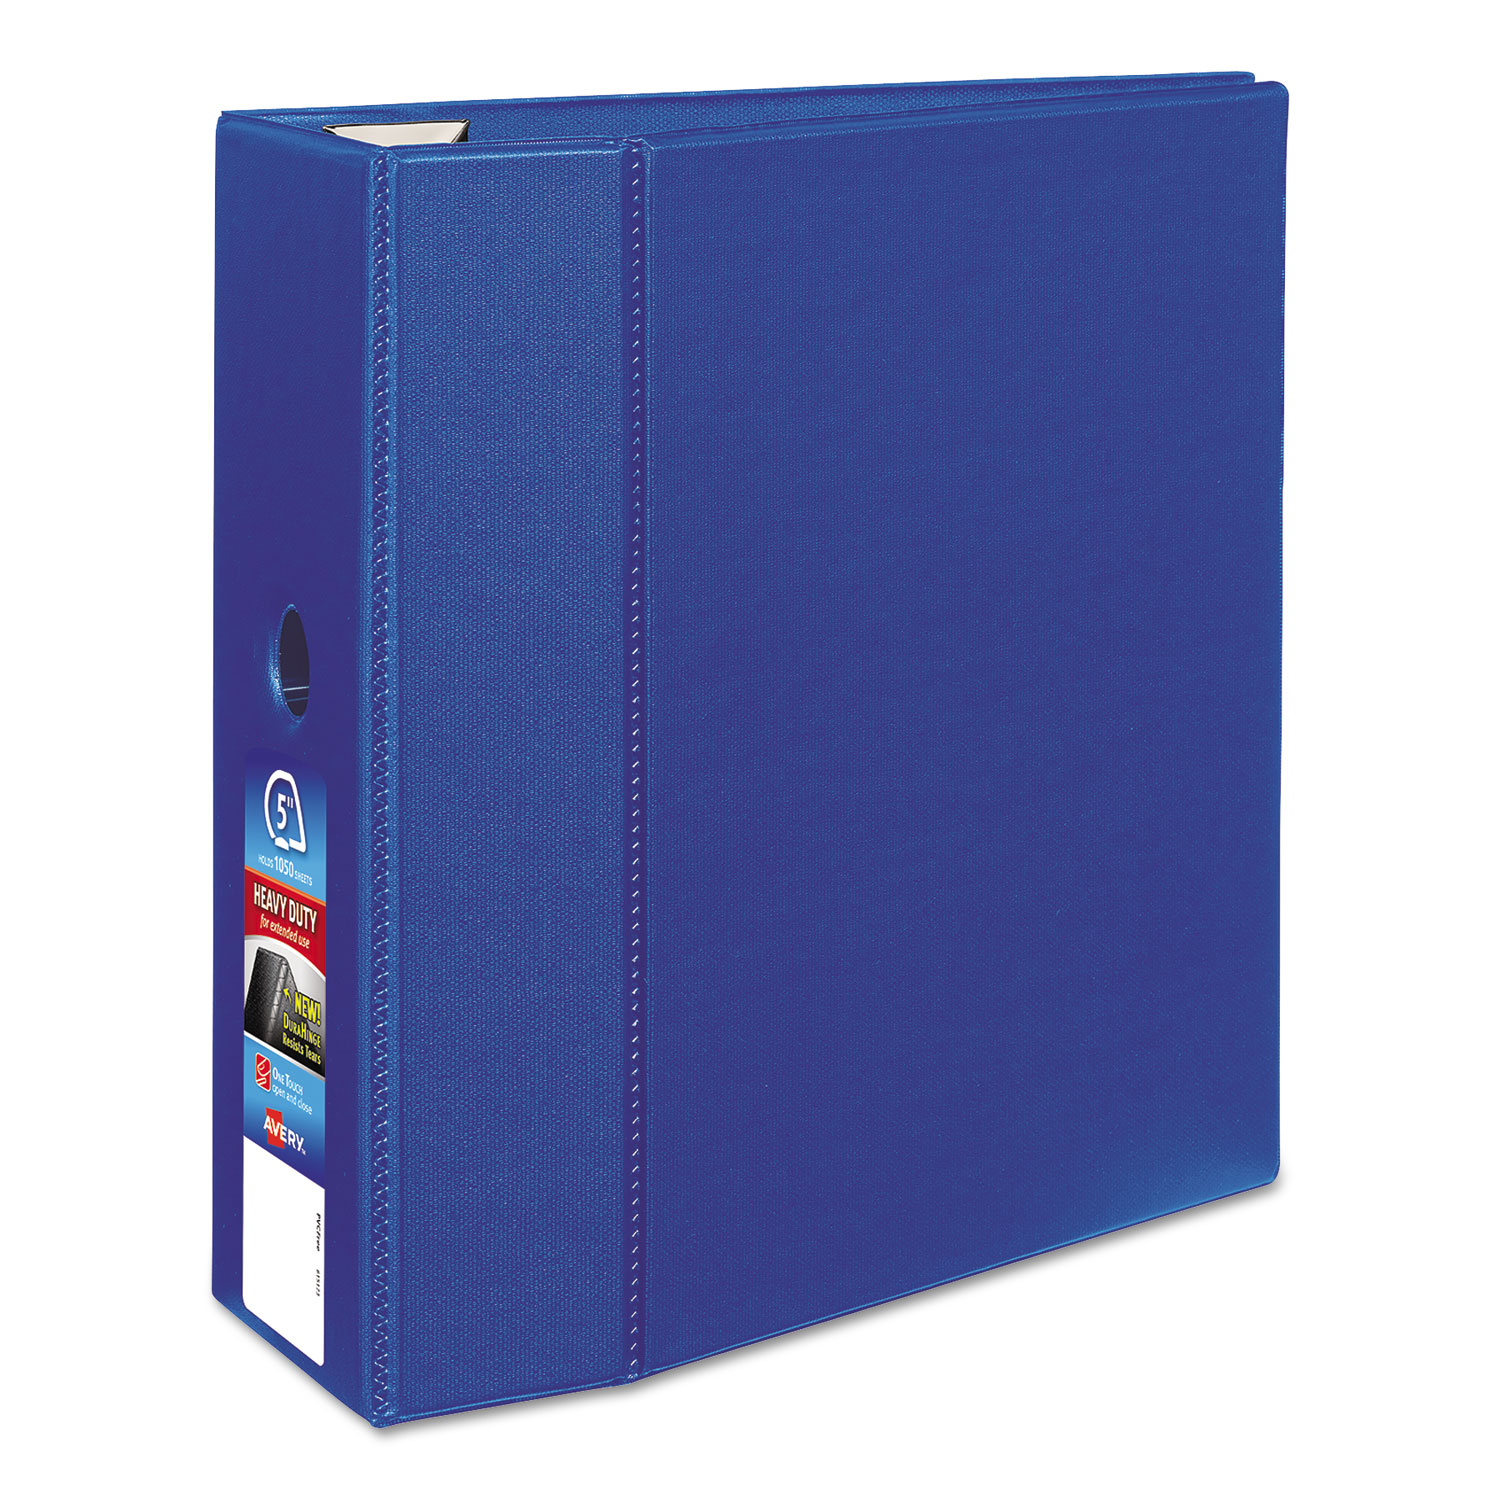  Avery 79886 Heavy-Duty Non-View Binder with DuraHinge and Locking One Touch EZD Rings, 3 Rings, 5 Capacity, 11 x 8.5, Blue (AVE79886) 